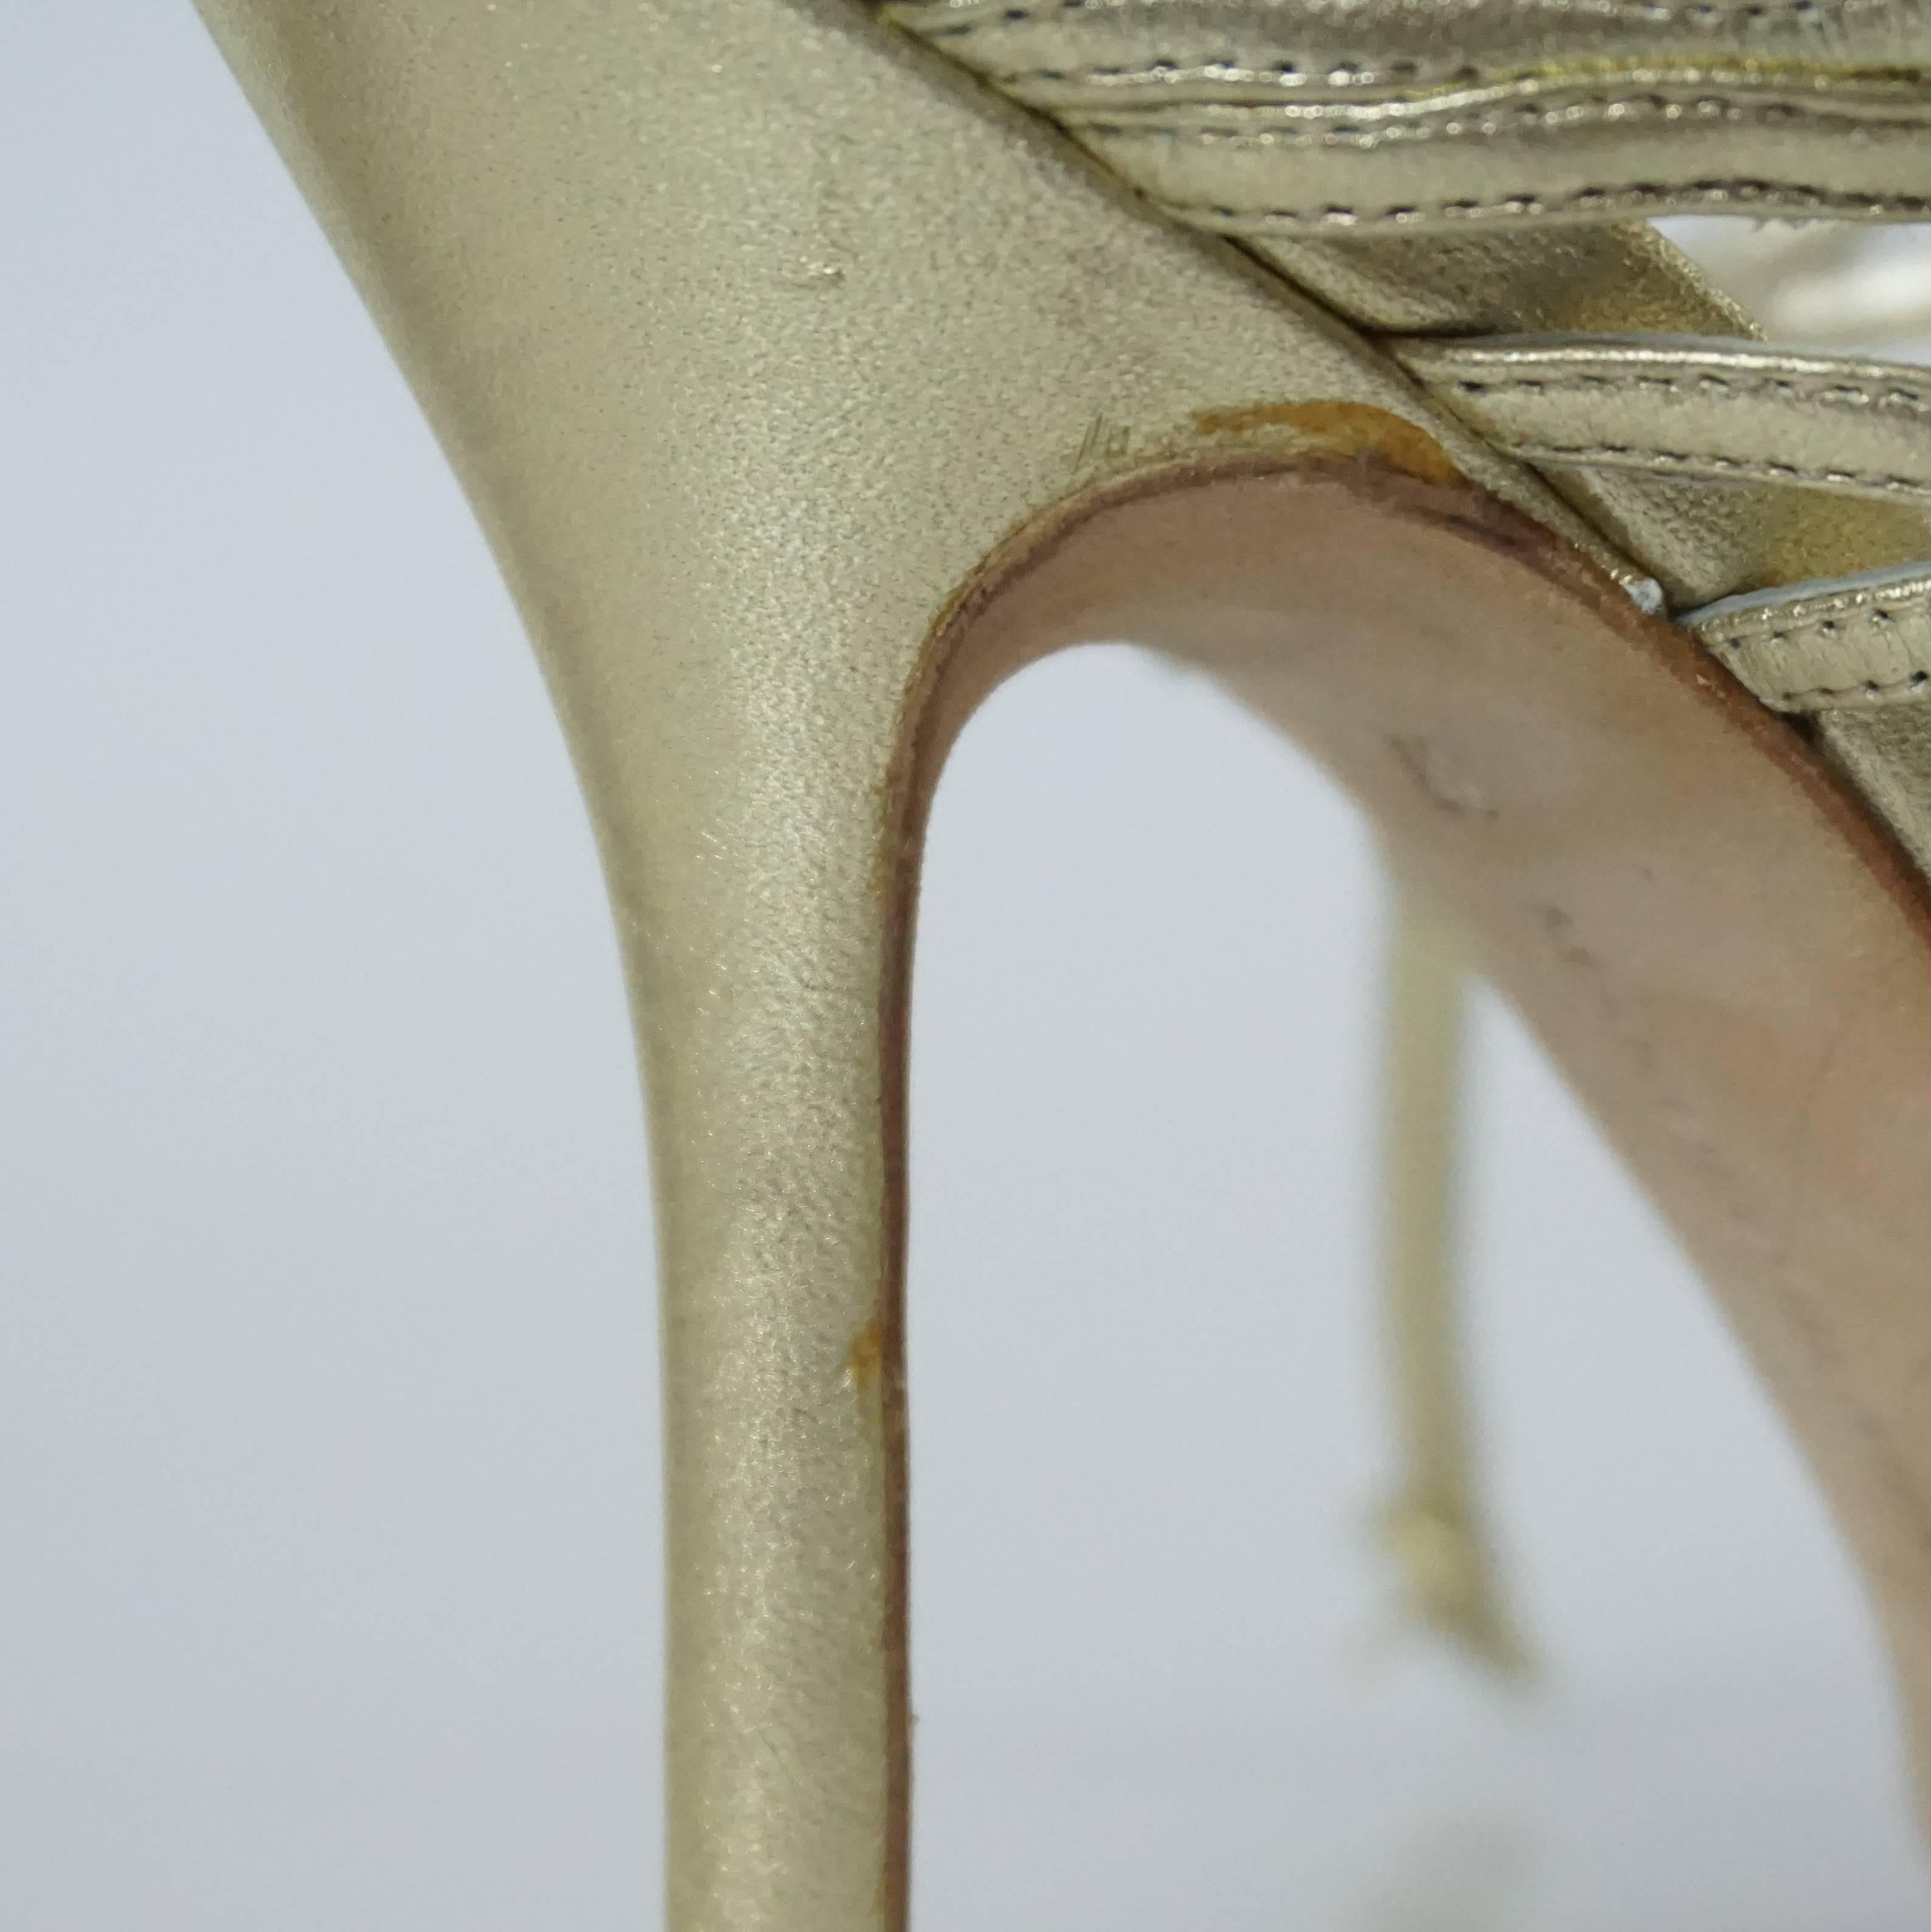 Manolo Blahnik Gold Leather Caged Heels - 37 4